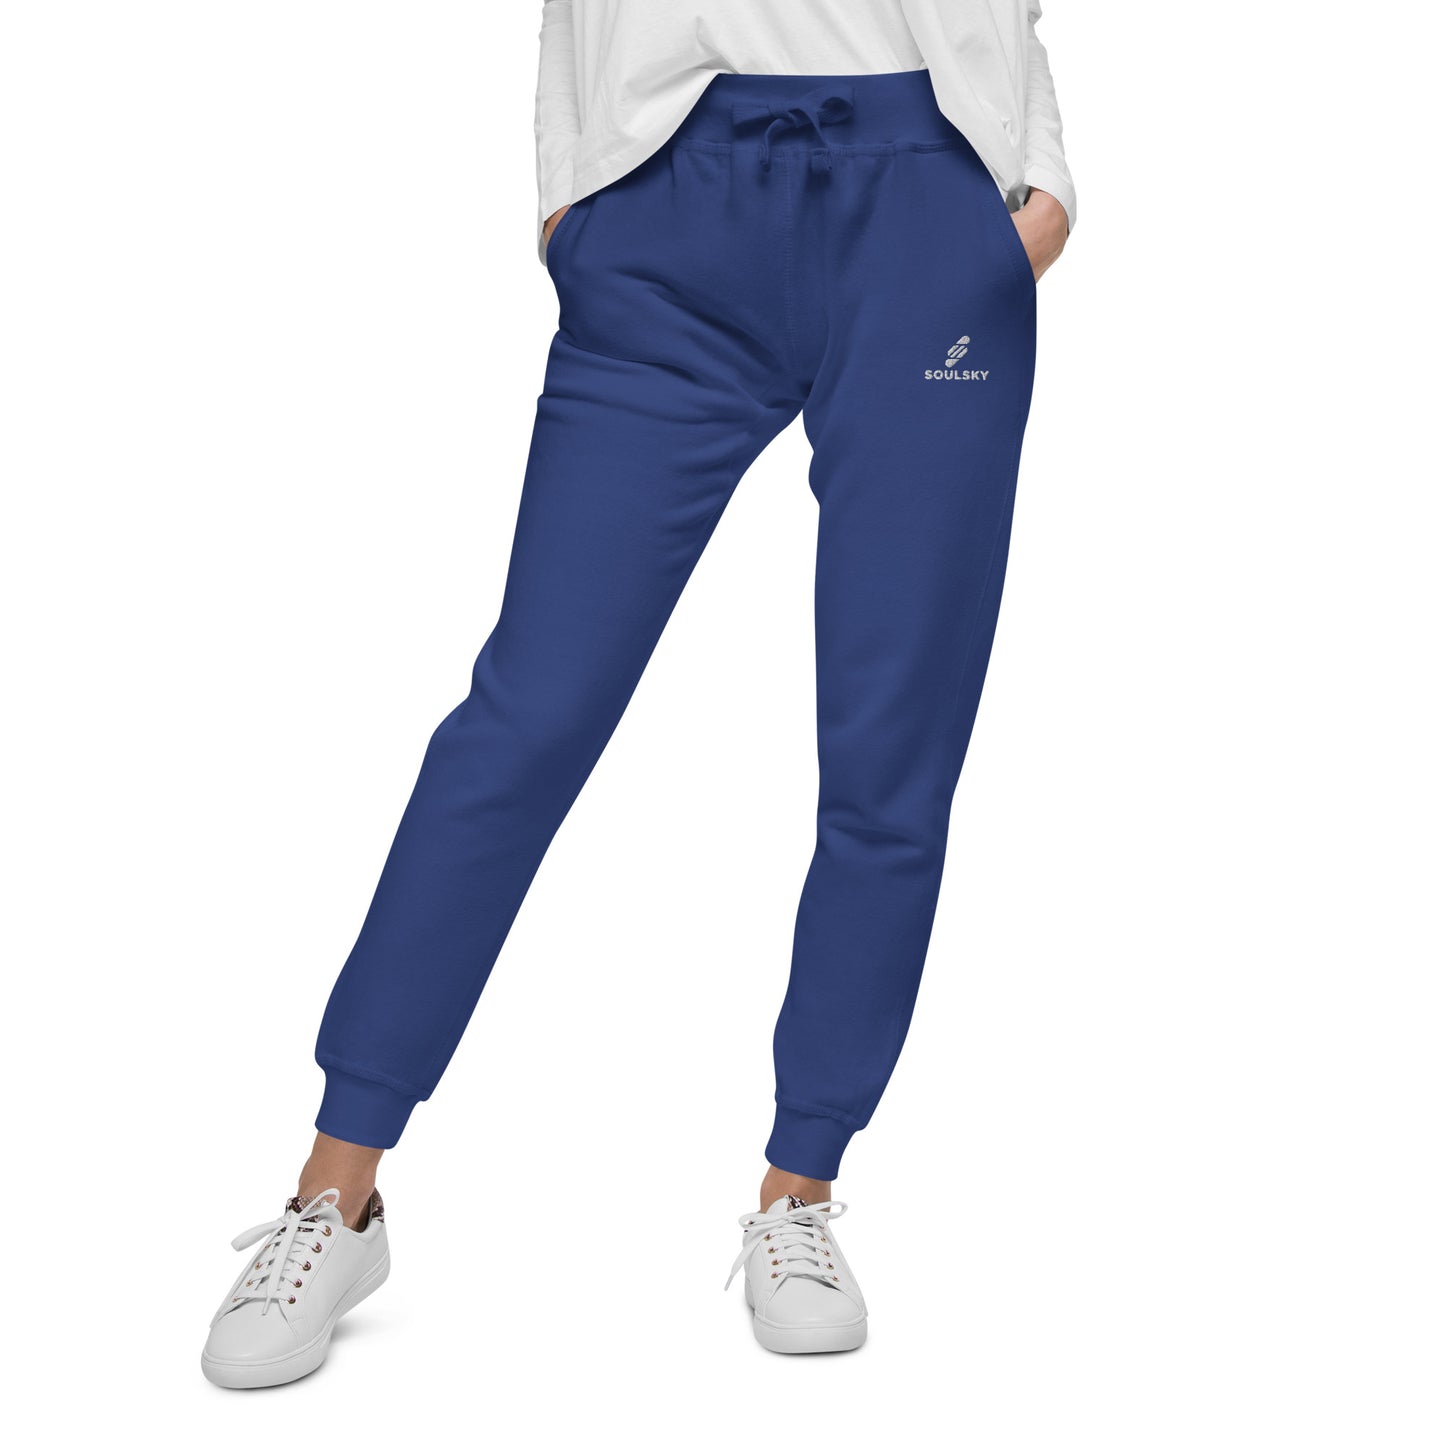 Female model wearing royal blue unisex joggers with white embroidered logo on left thigh that says "SOULSKY".